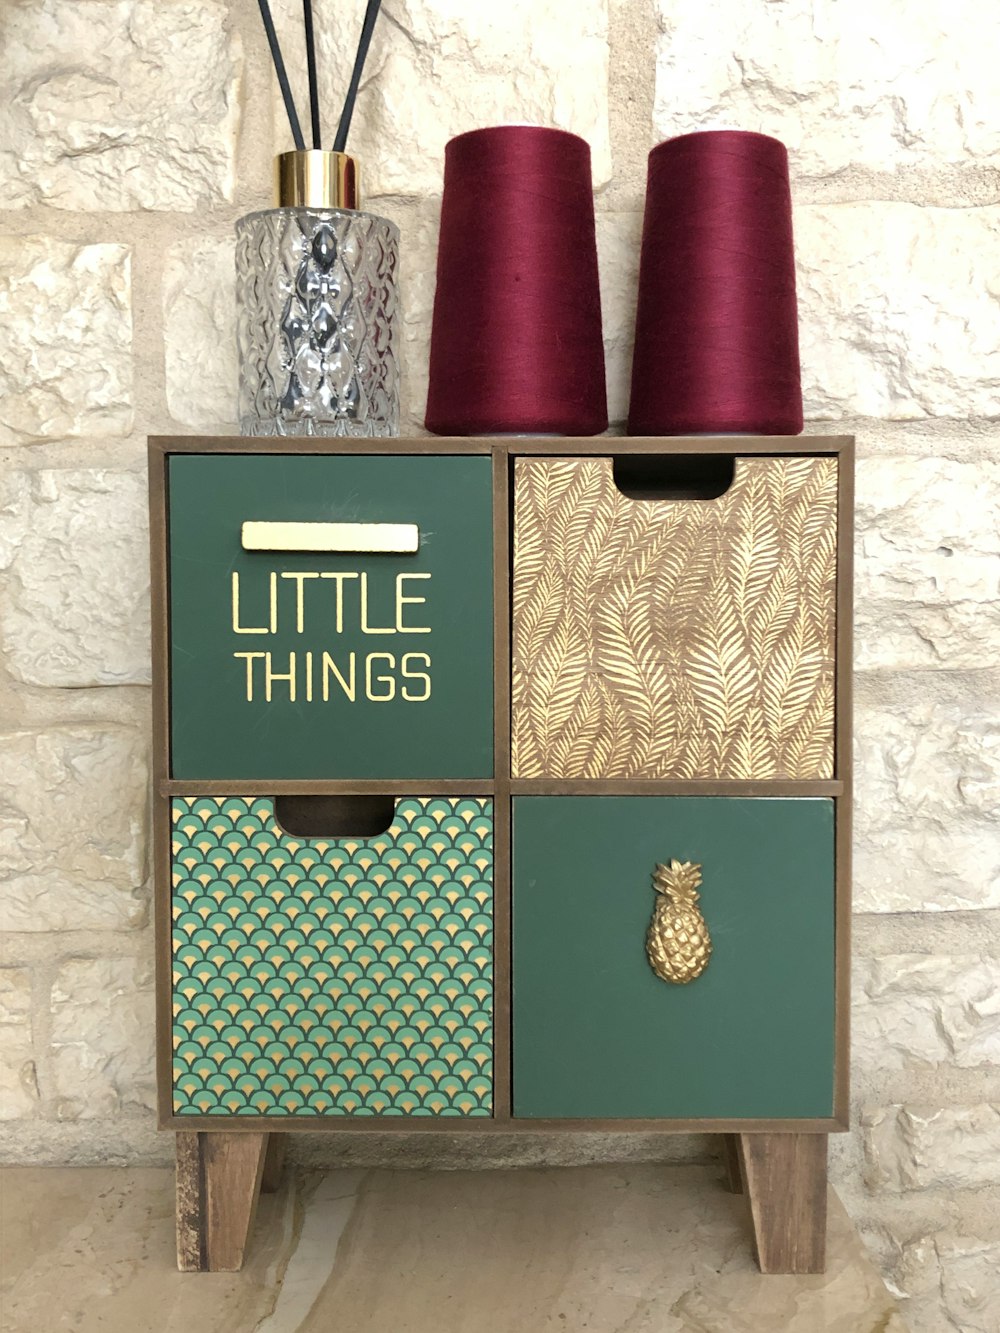 two maroon sewing threads on cube shelf